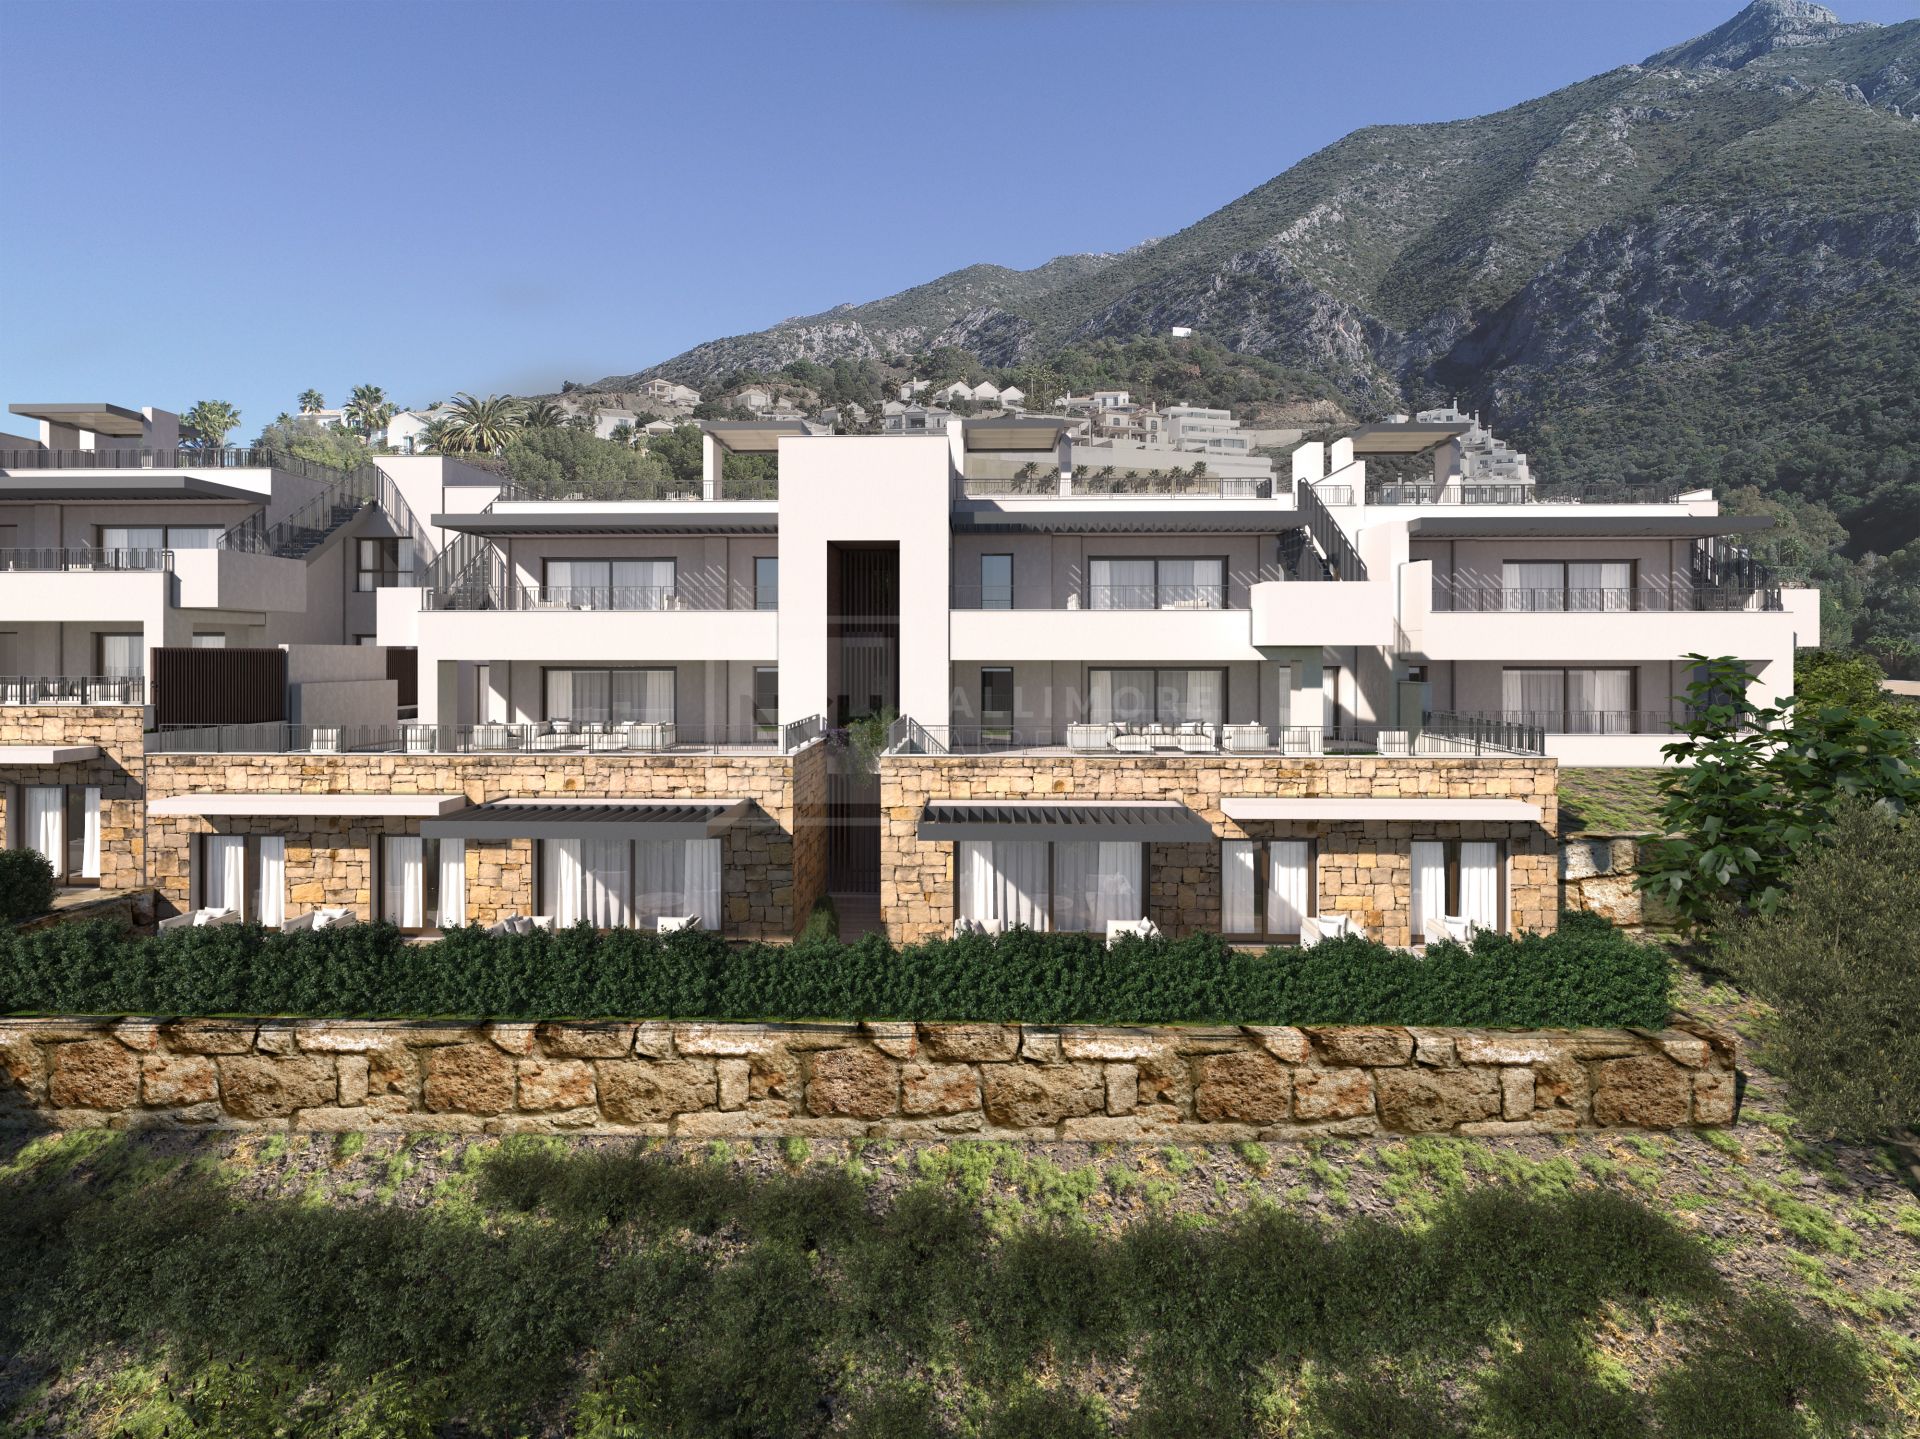 Almazara Hills, modern apartments surrounded by nature close to Marbella